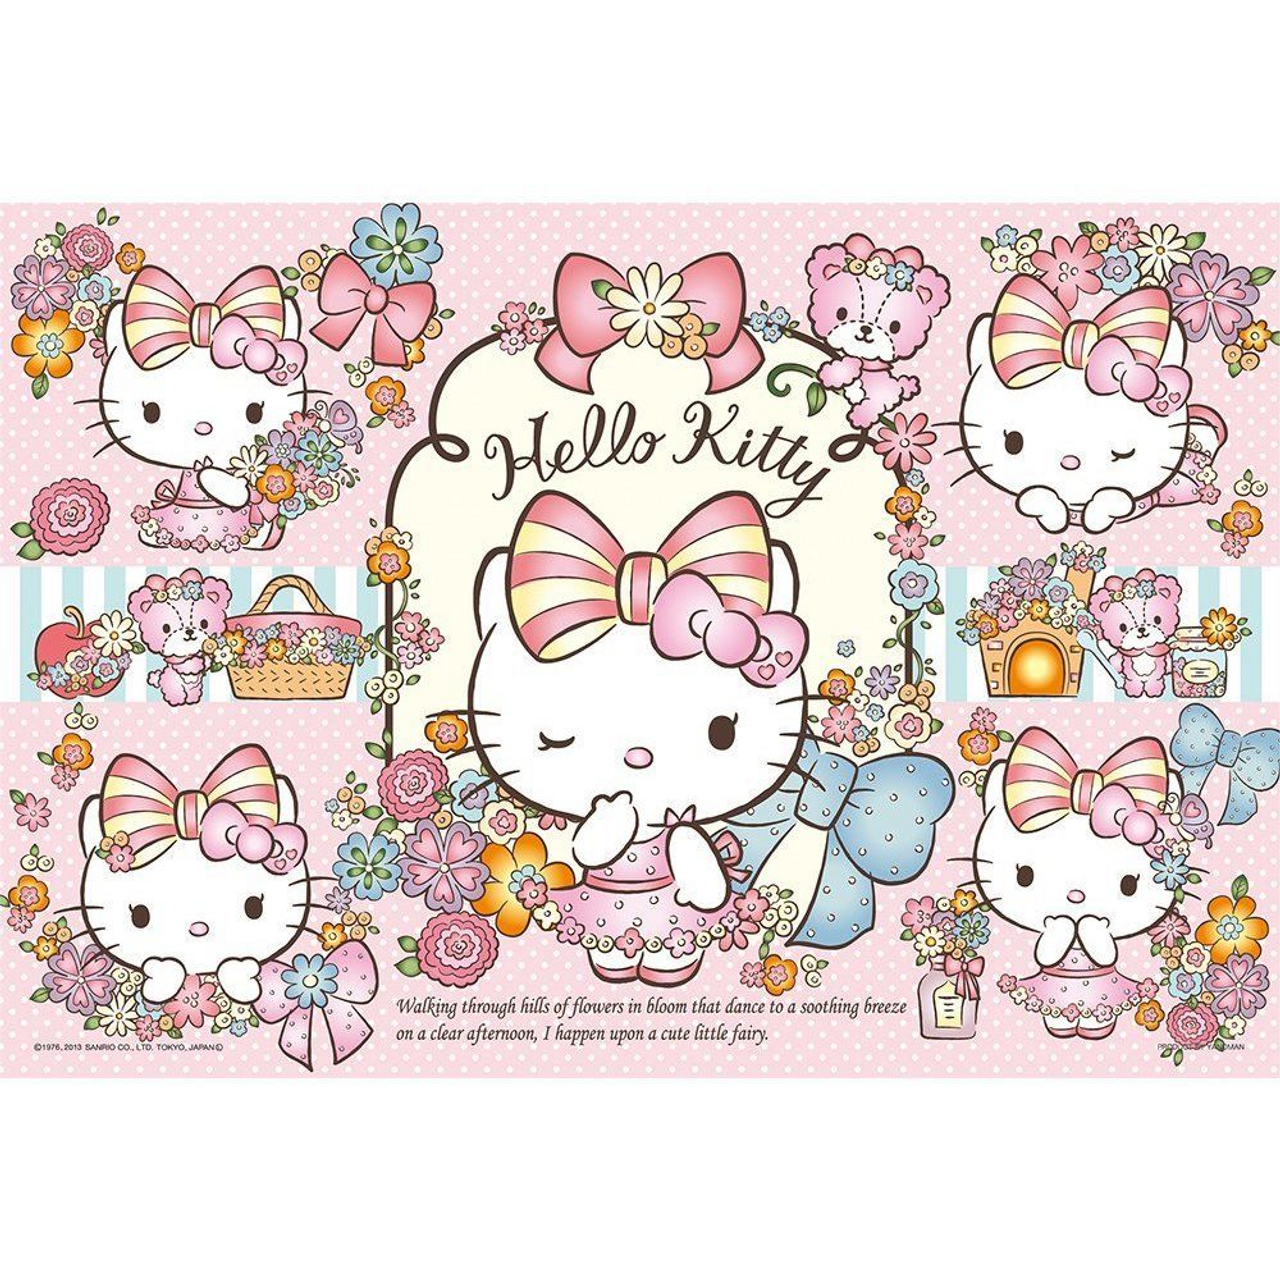 Sanrio Hello Kitty and Friends Floral Allover Print 7-Quart Slow